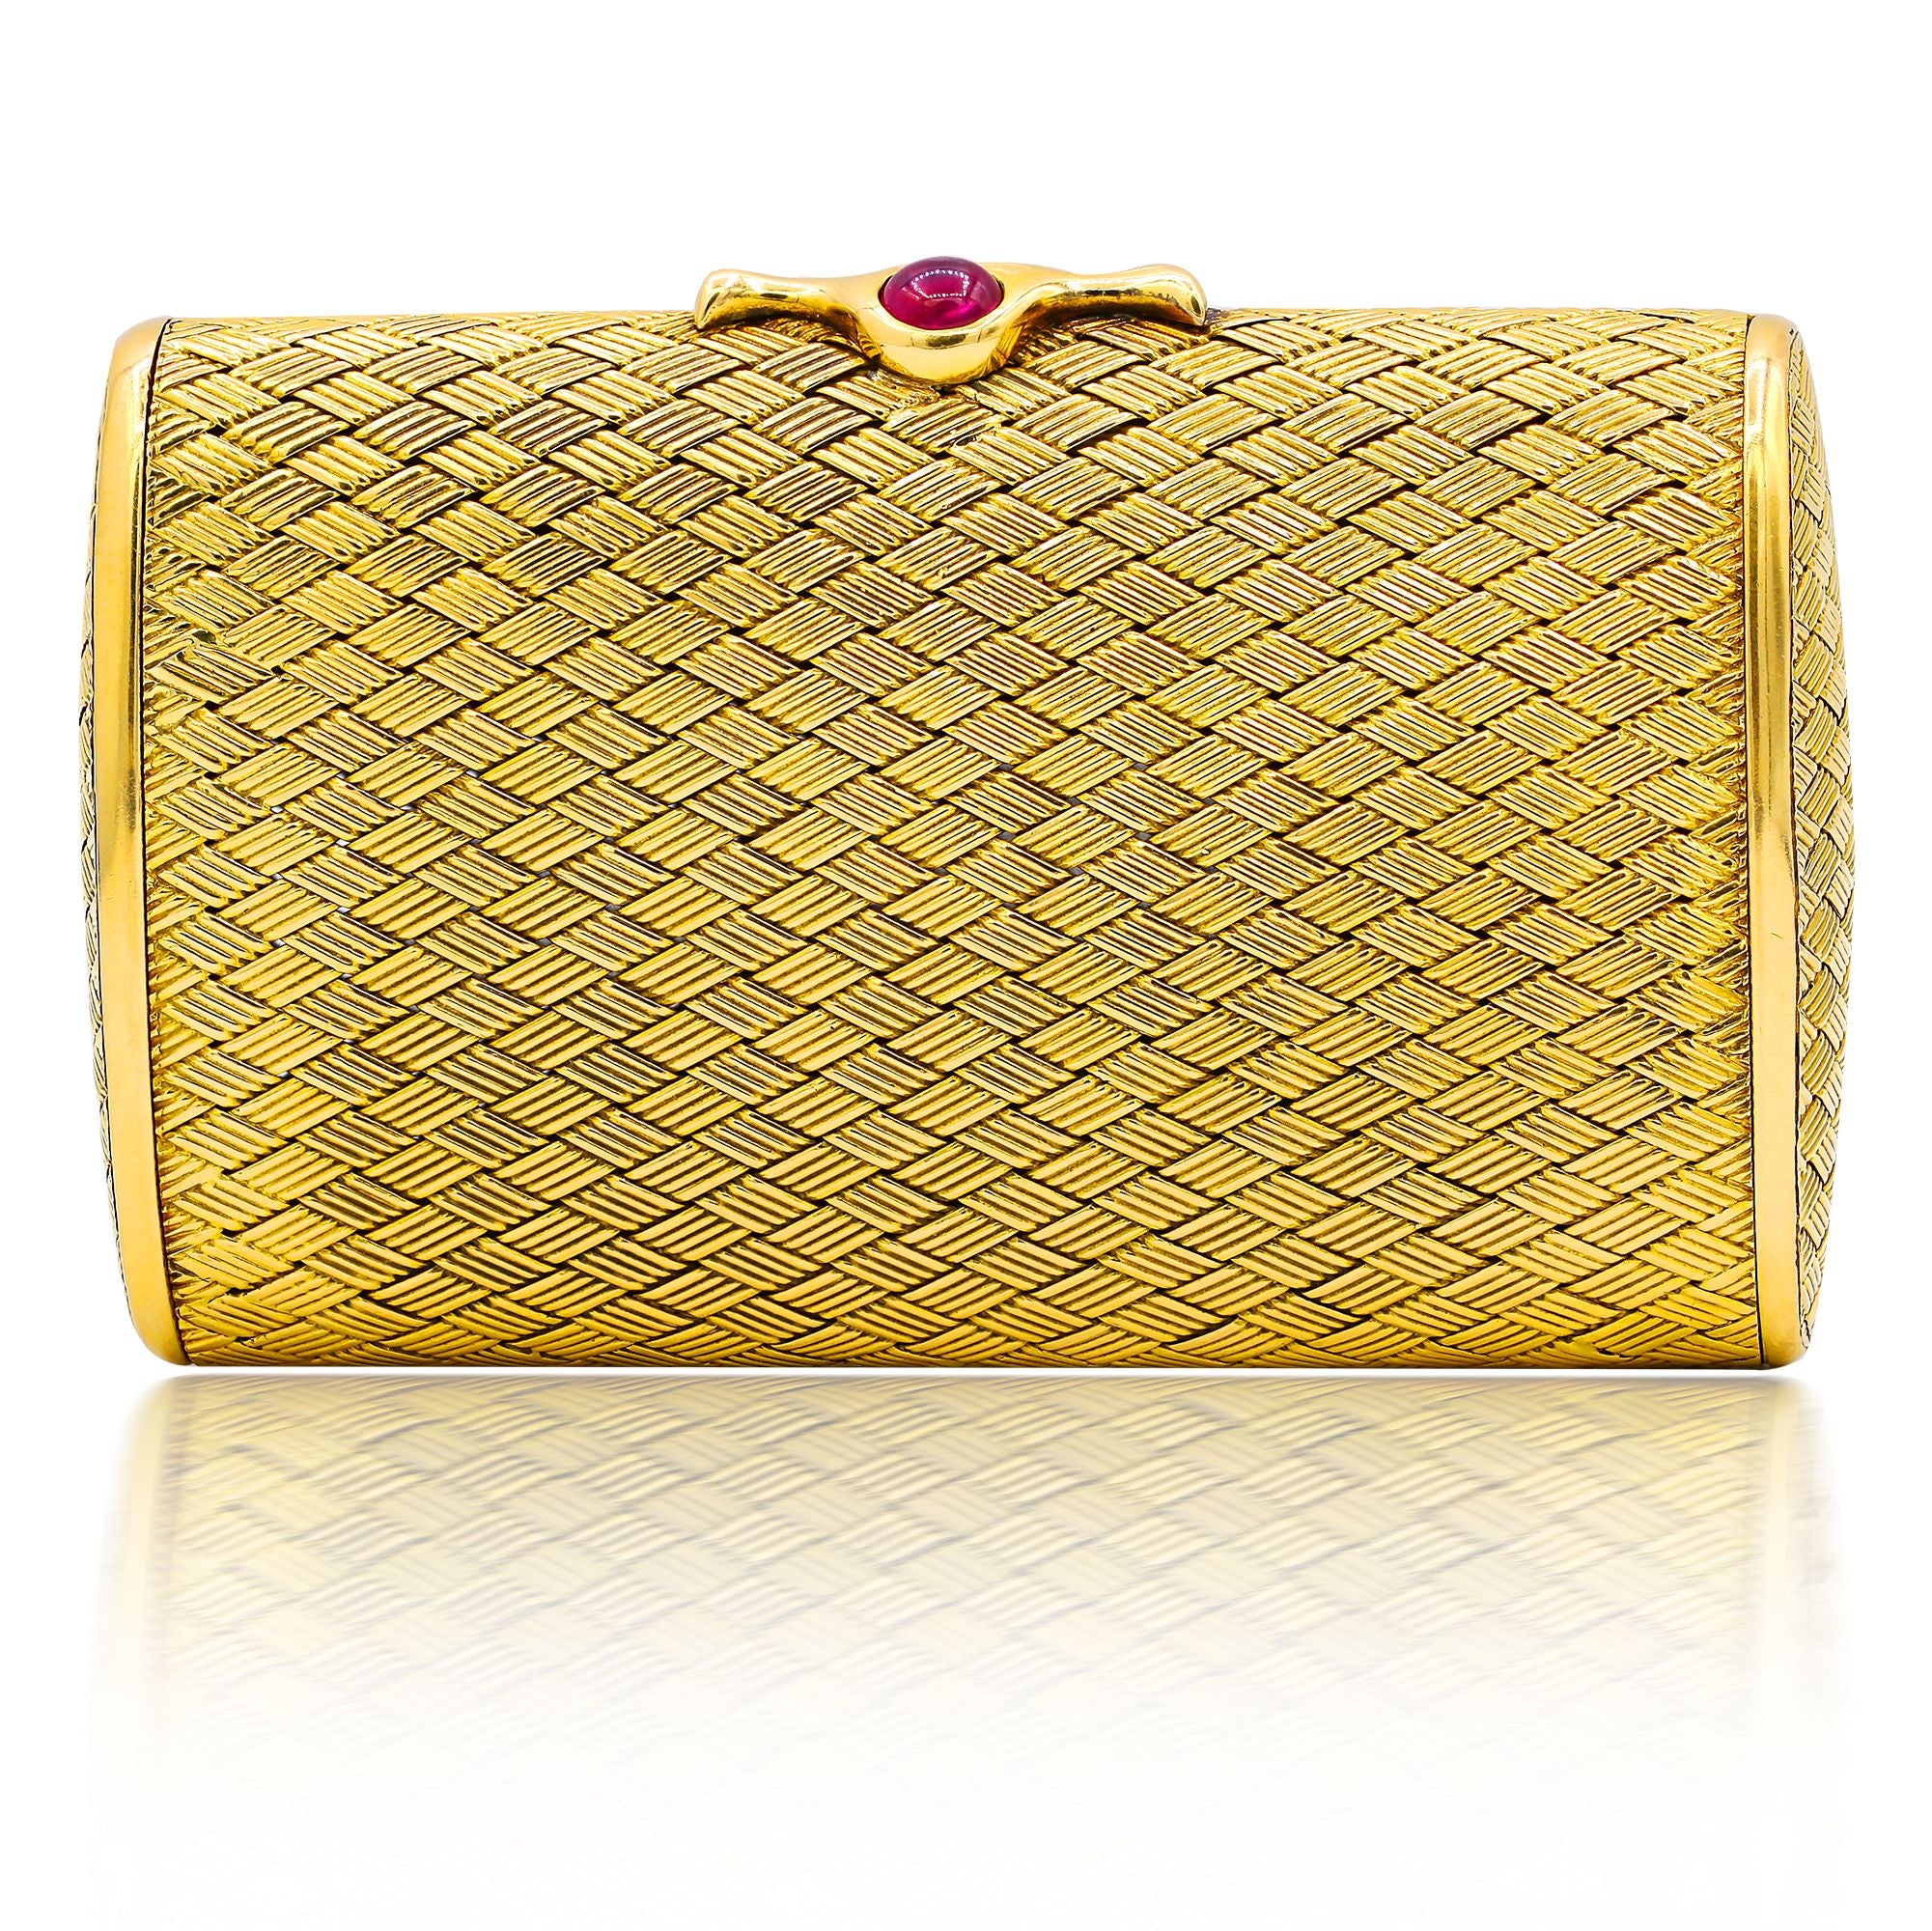 Gold Ruby Wallet